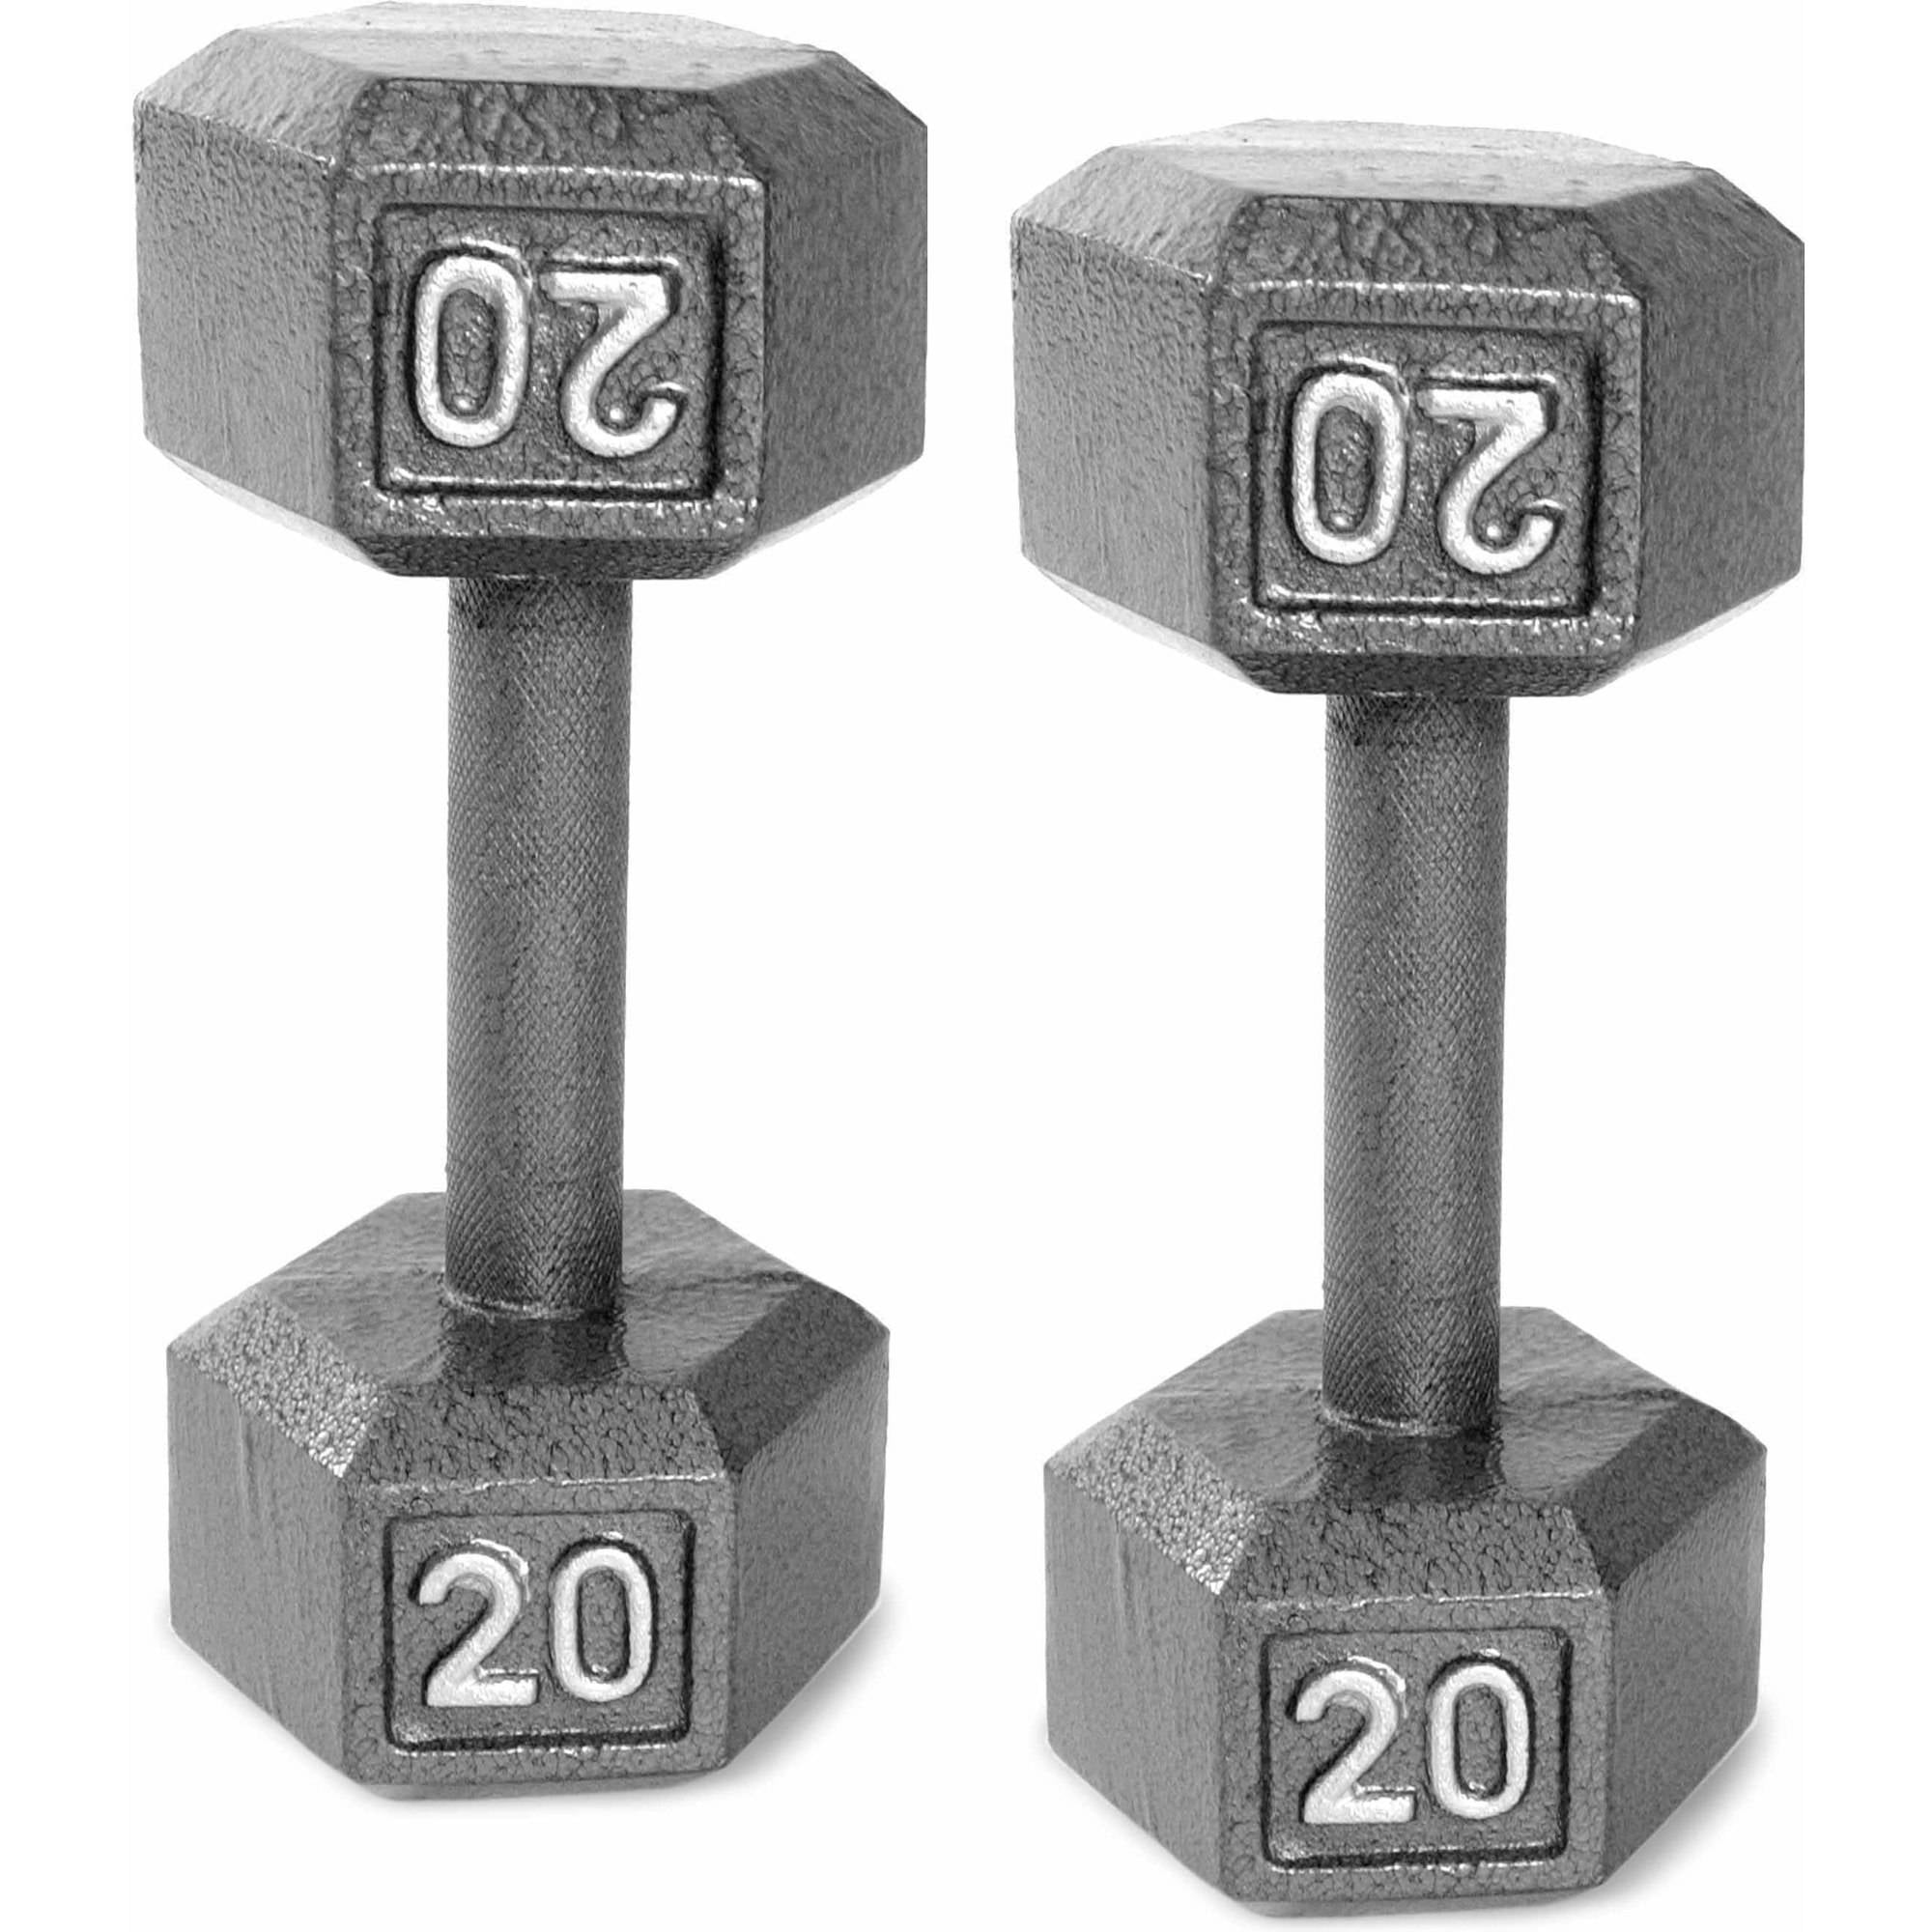 20kg Dumbbells Weights Set Cast Iron Chrome with Box Free Delivery 